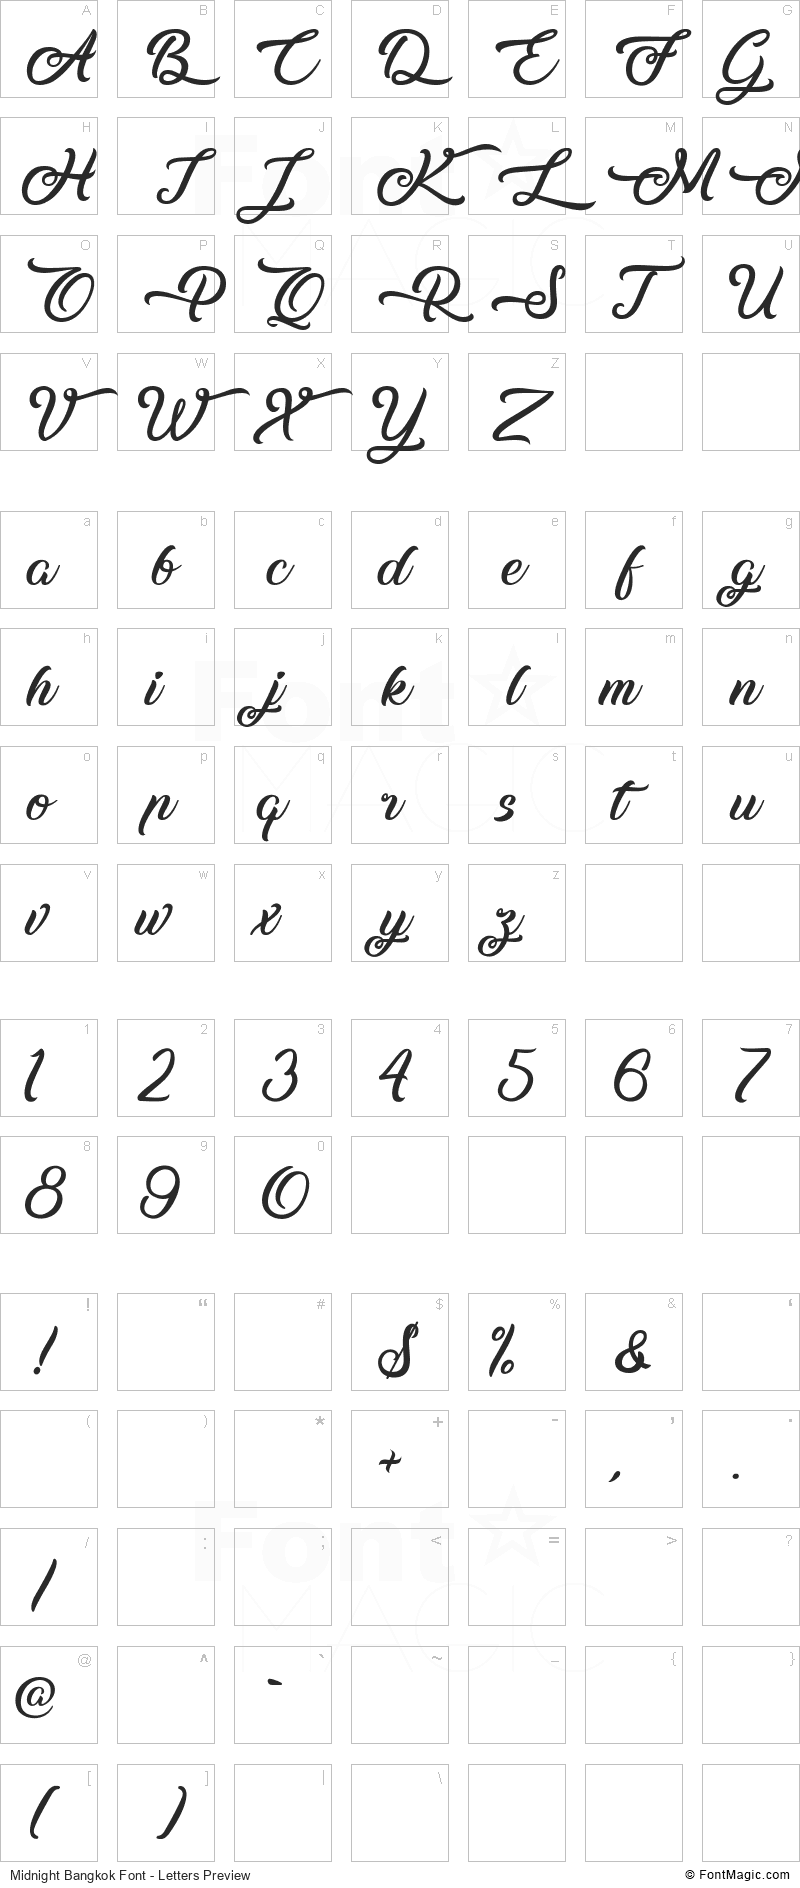 Midnight Bangkok Font - All Latters Preview Chart